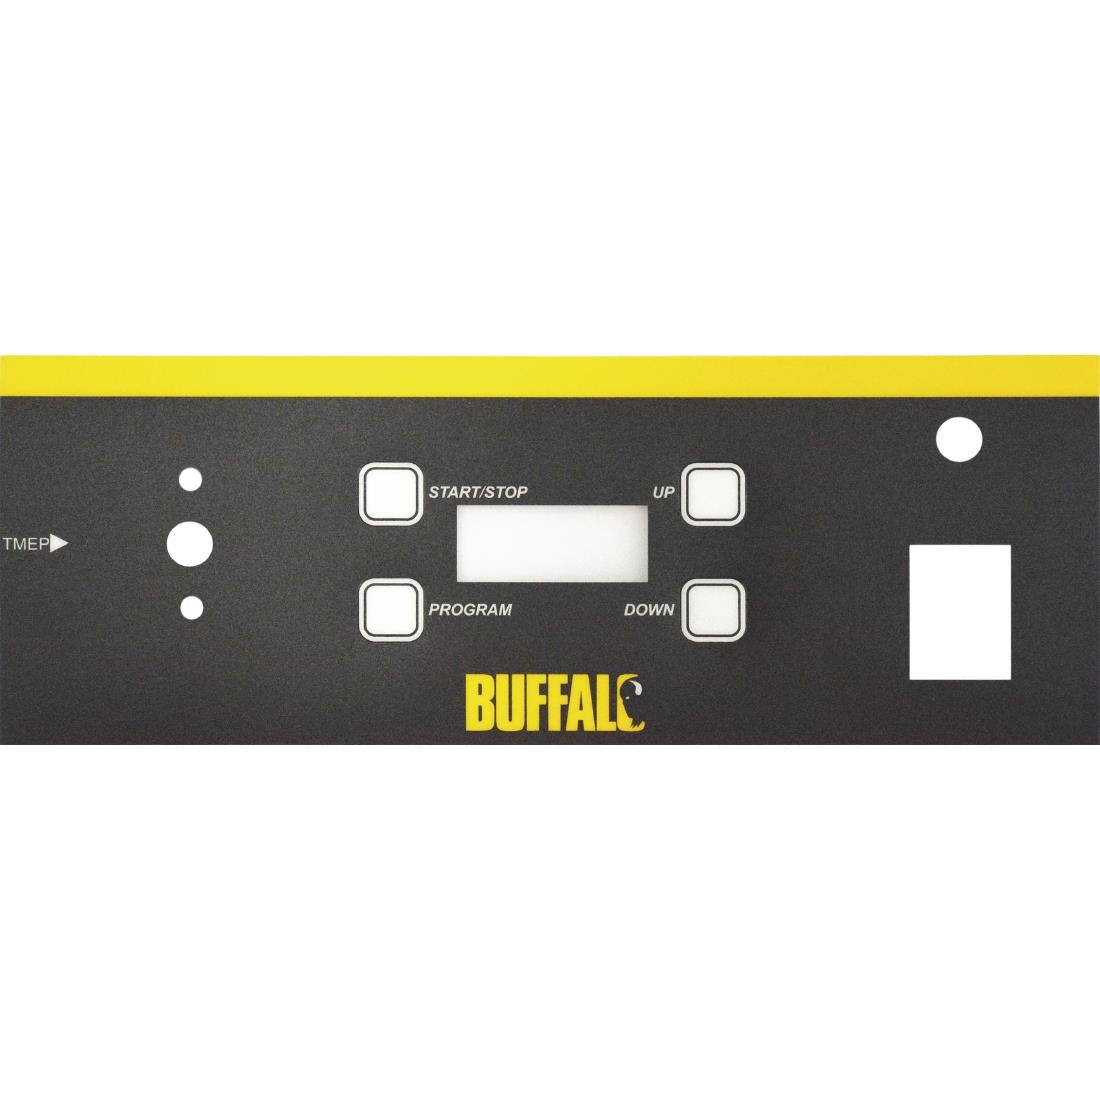 Buffalo Decal Sticker AF492 JD Catering Equipment Solutions Ltd